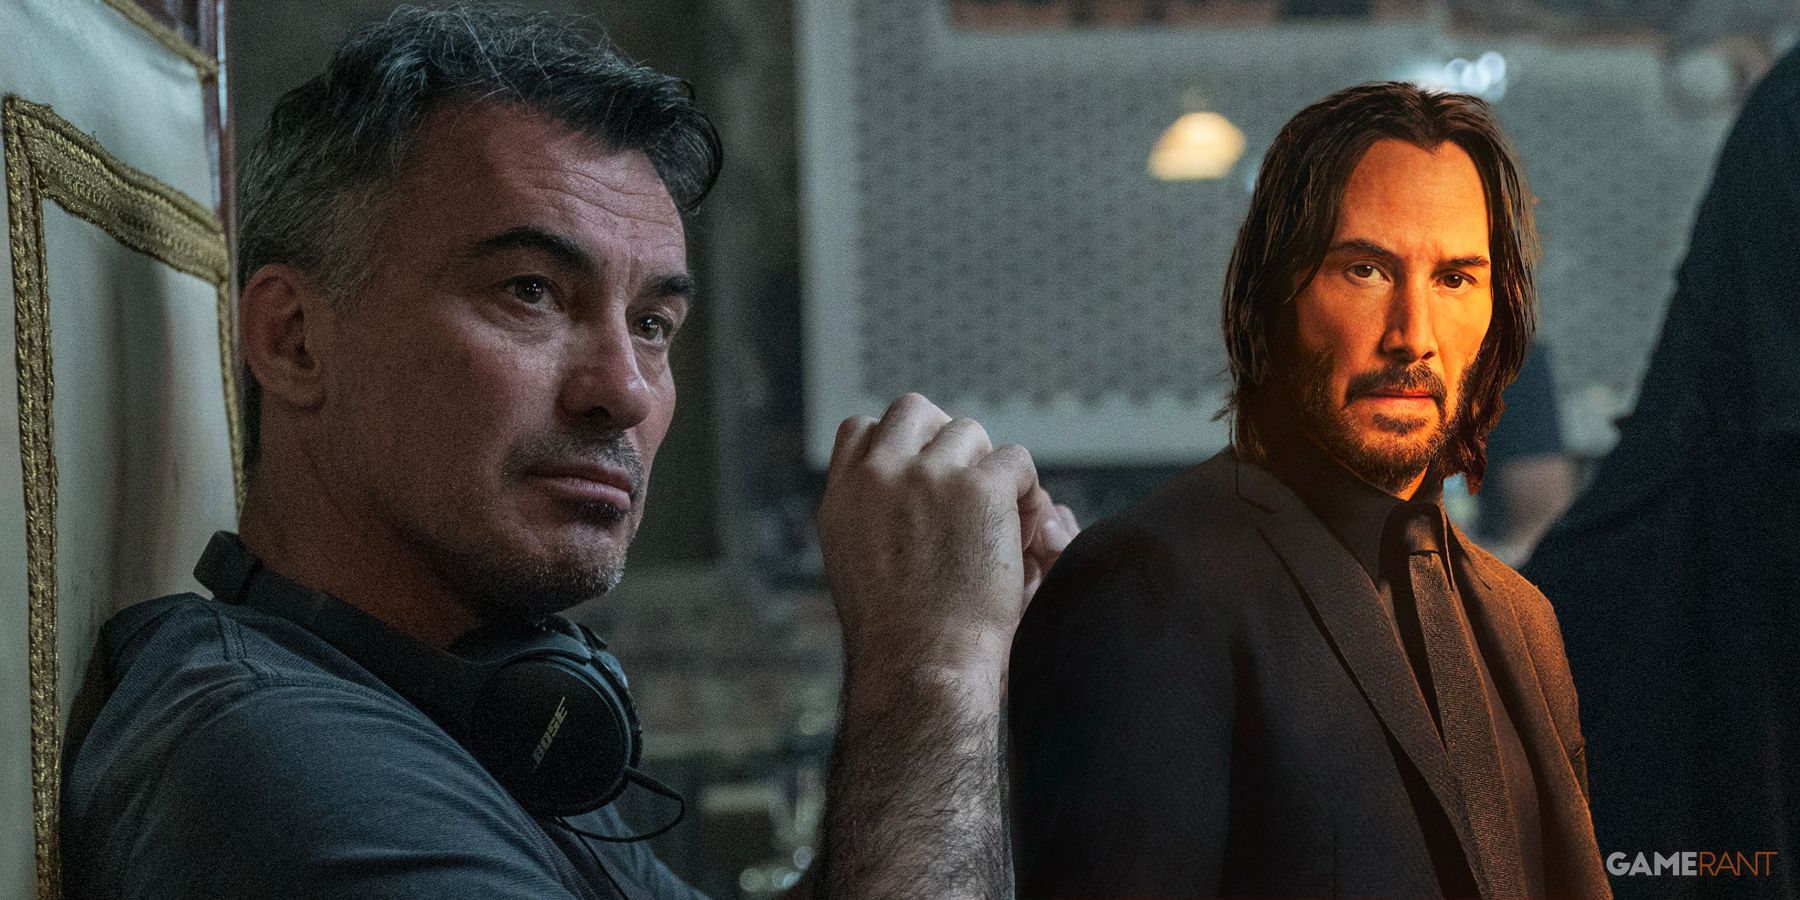 John Wick 5: Will Keanu Reeves Return for Another Action-Packed